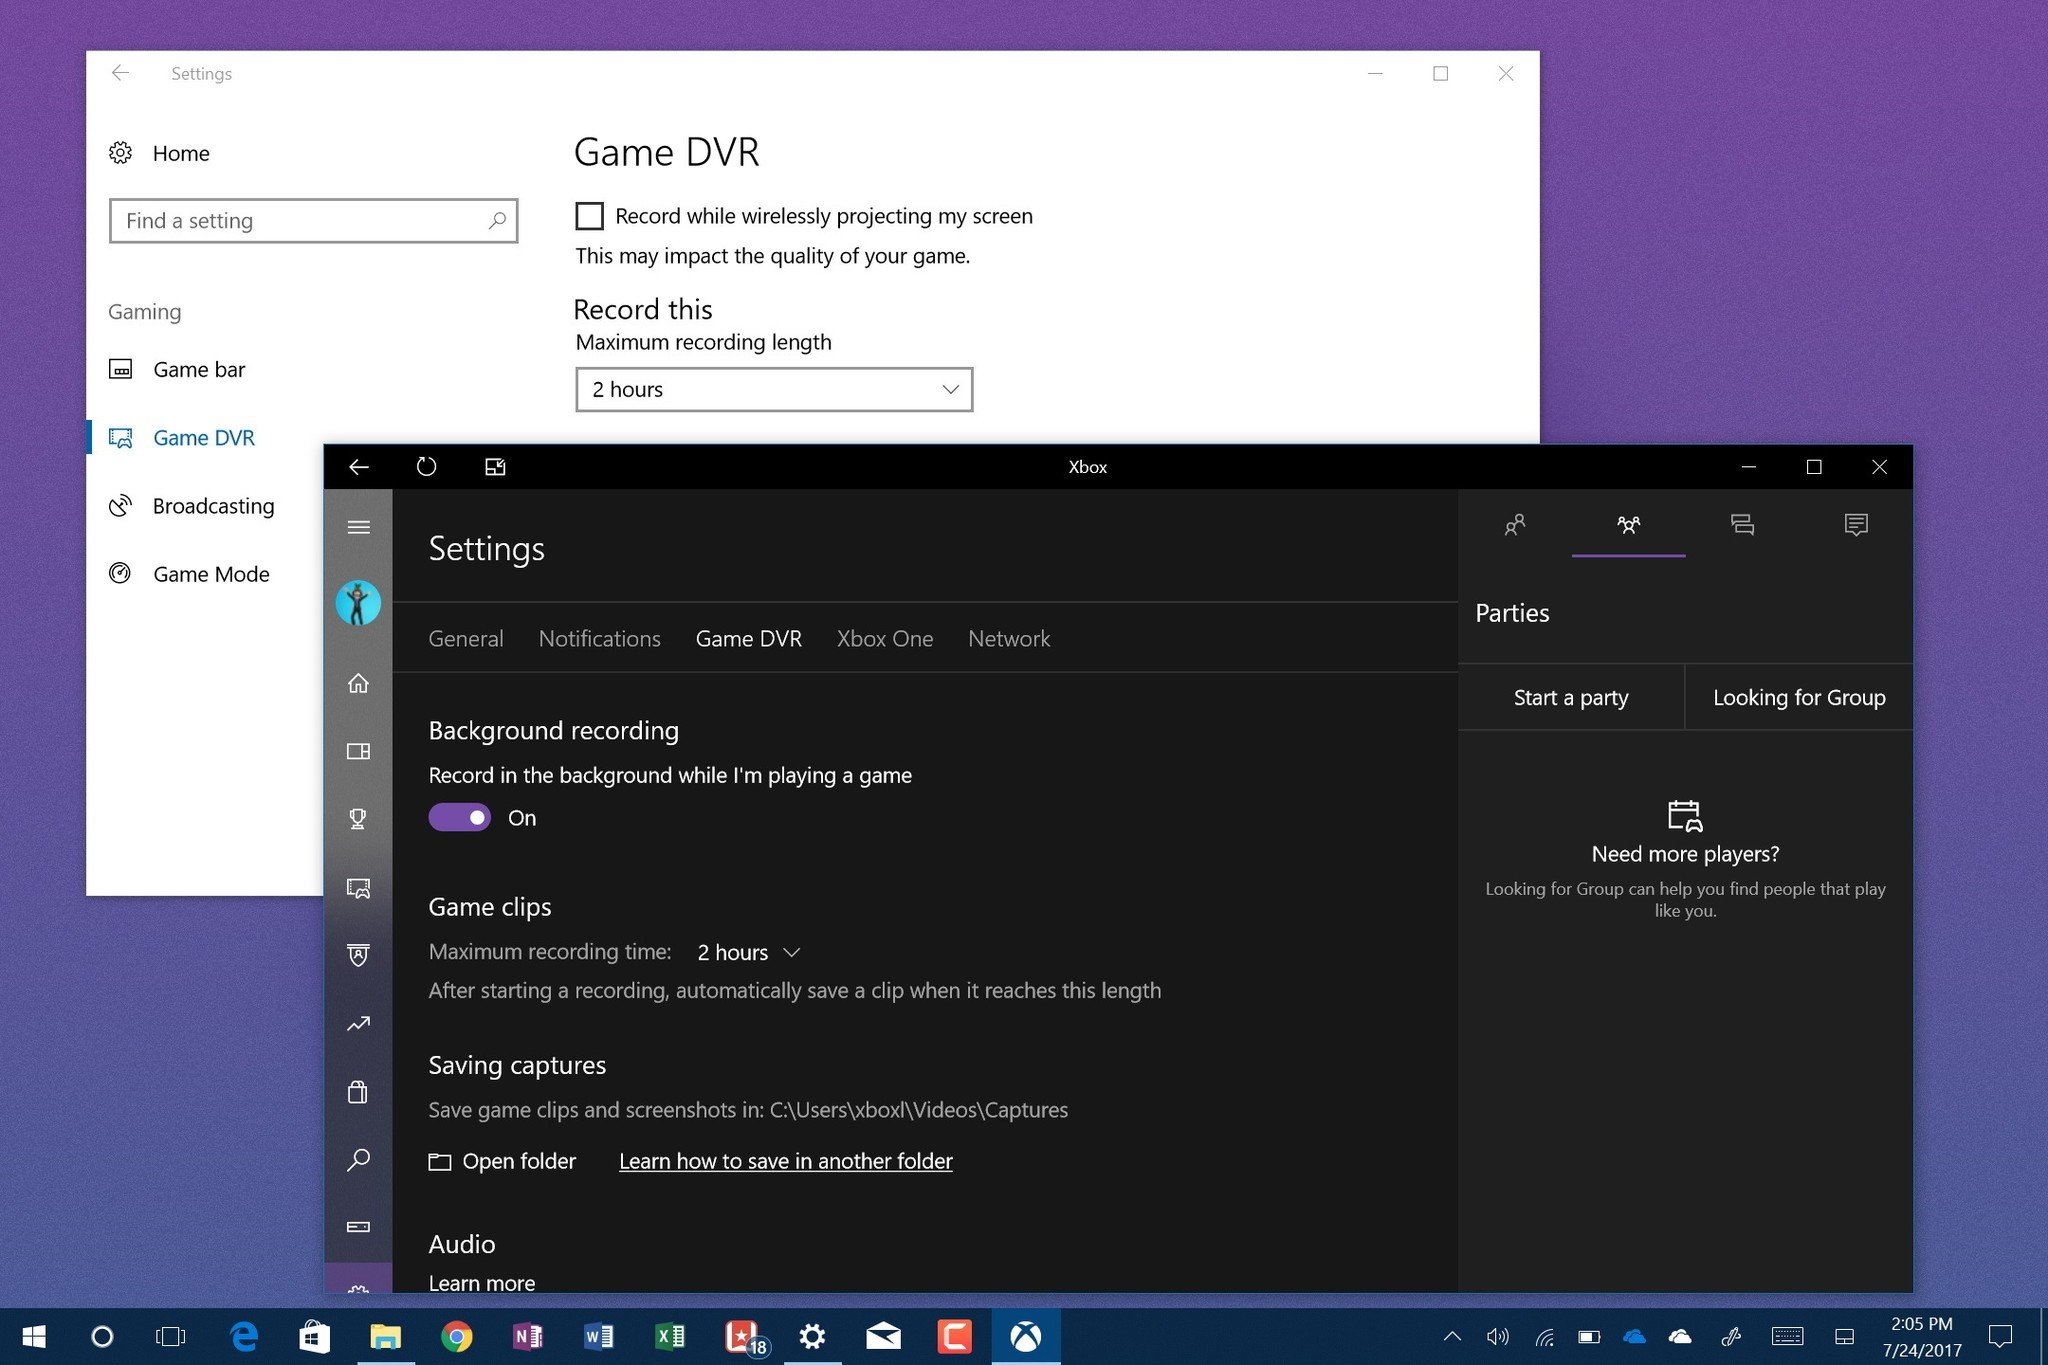 How to Use Windows 10 Game Bar